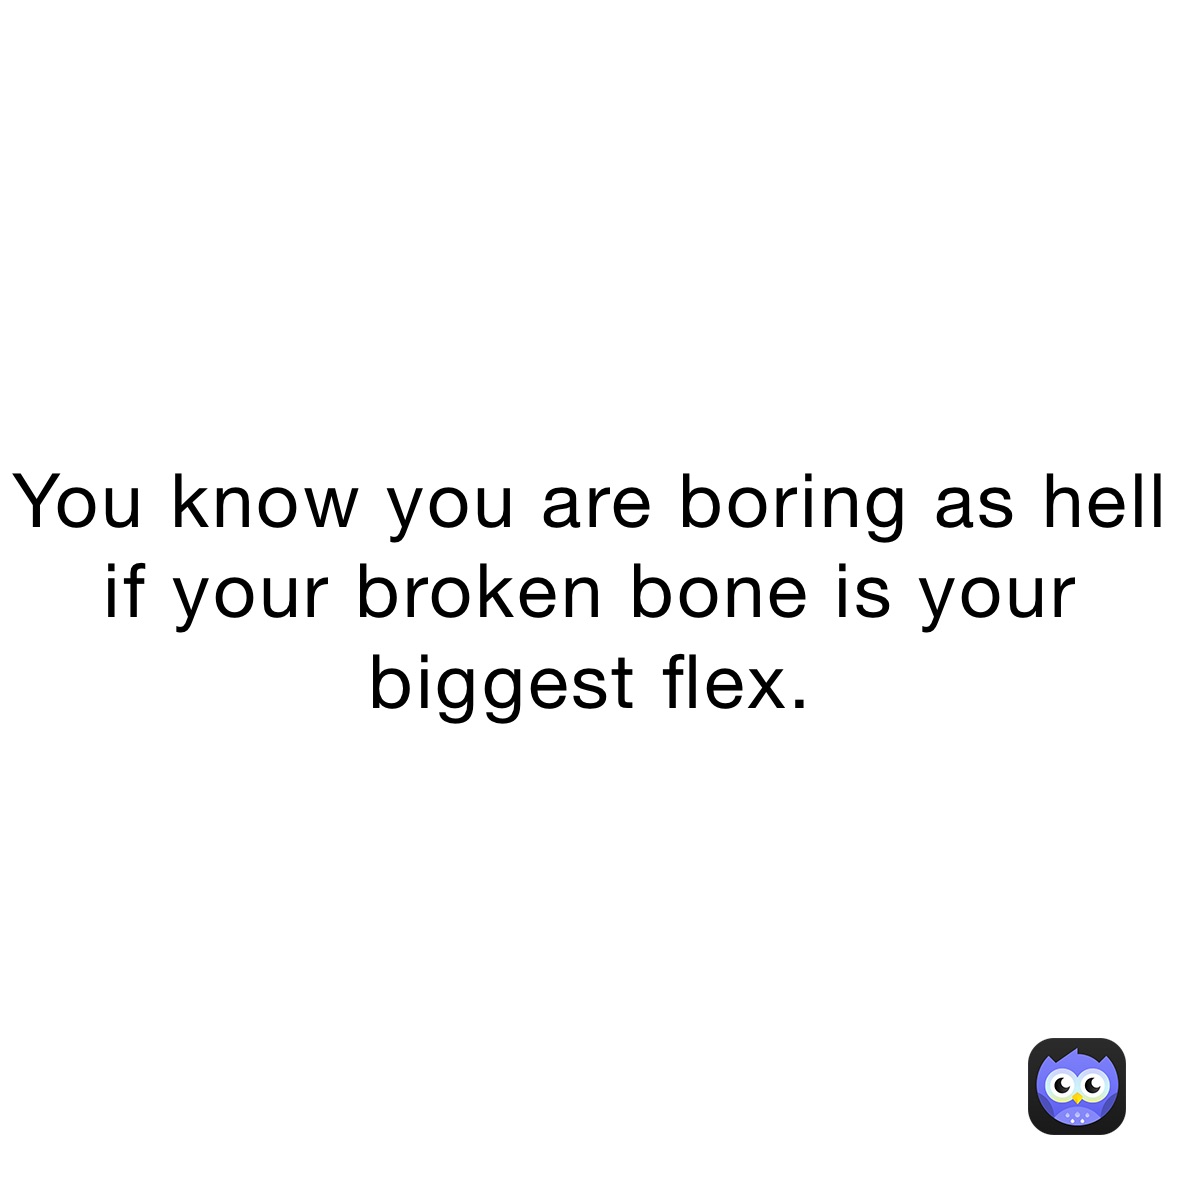 You know you are boring as hell if your broken bone is your biggest flex.